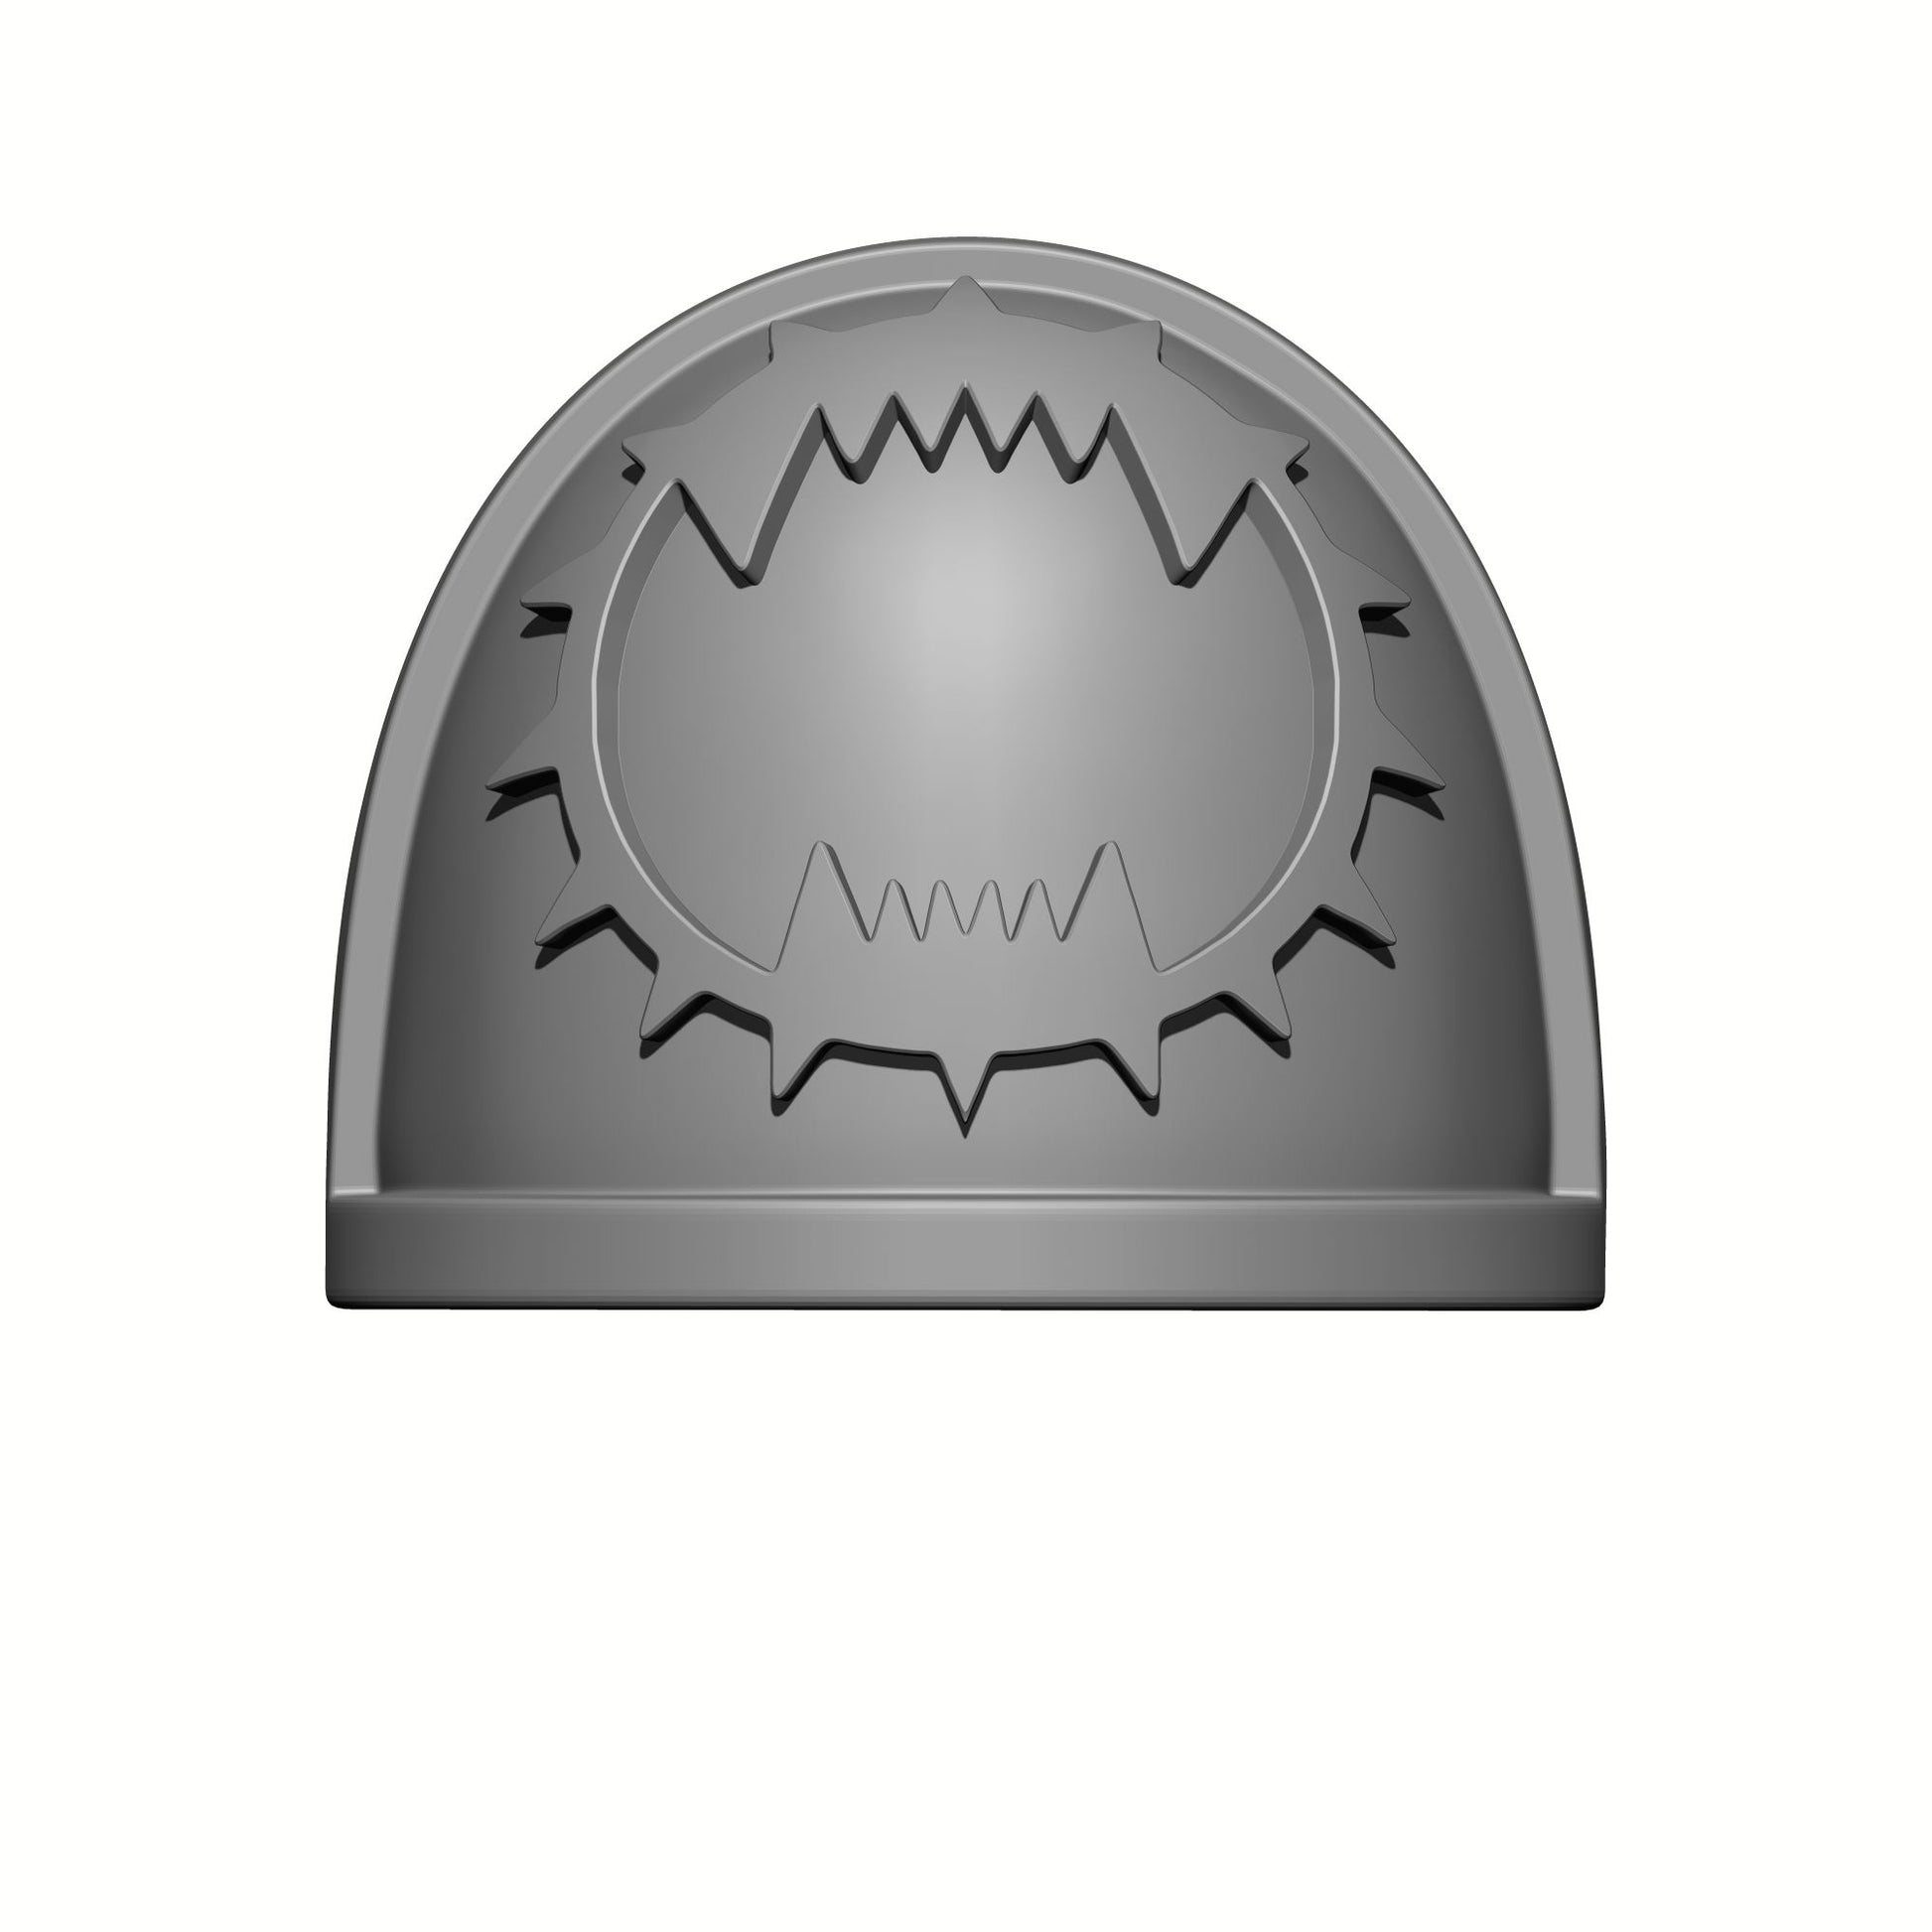 World Eaters Chapter MKIV Shoulder Pad Teeth Icon is Compatible with McFarlane Space Marine Action Figures designed by Fantasy World Games